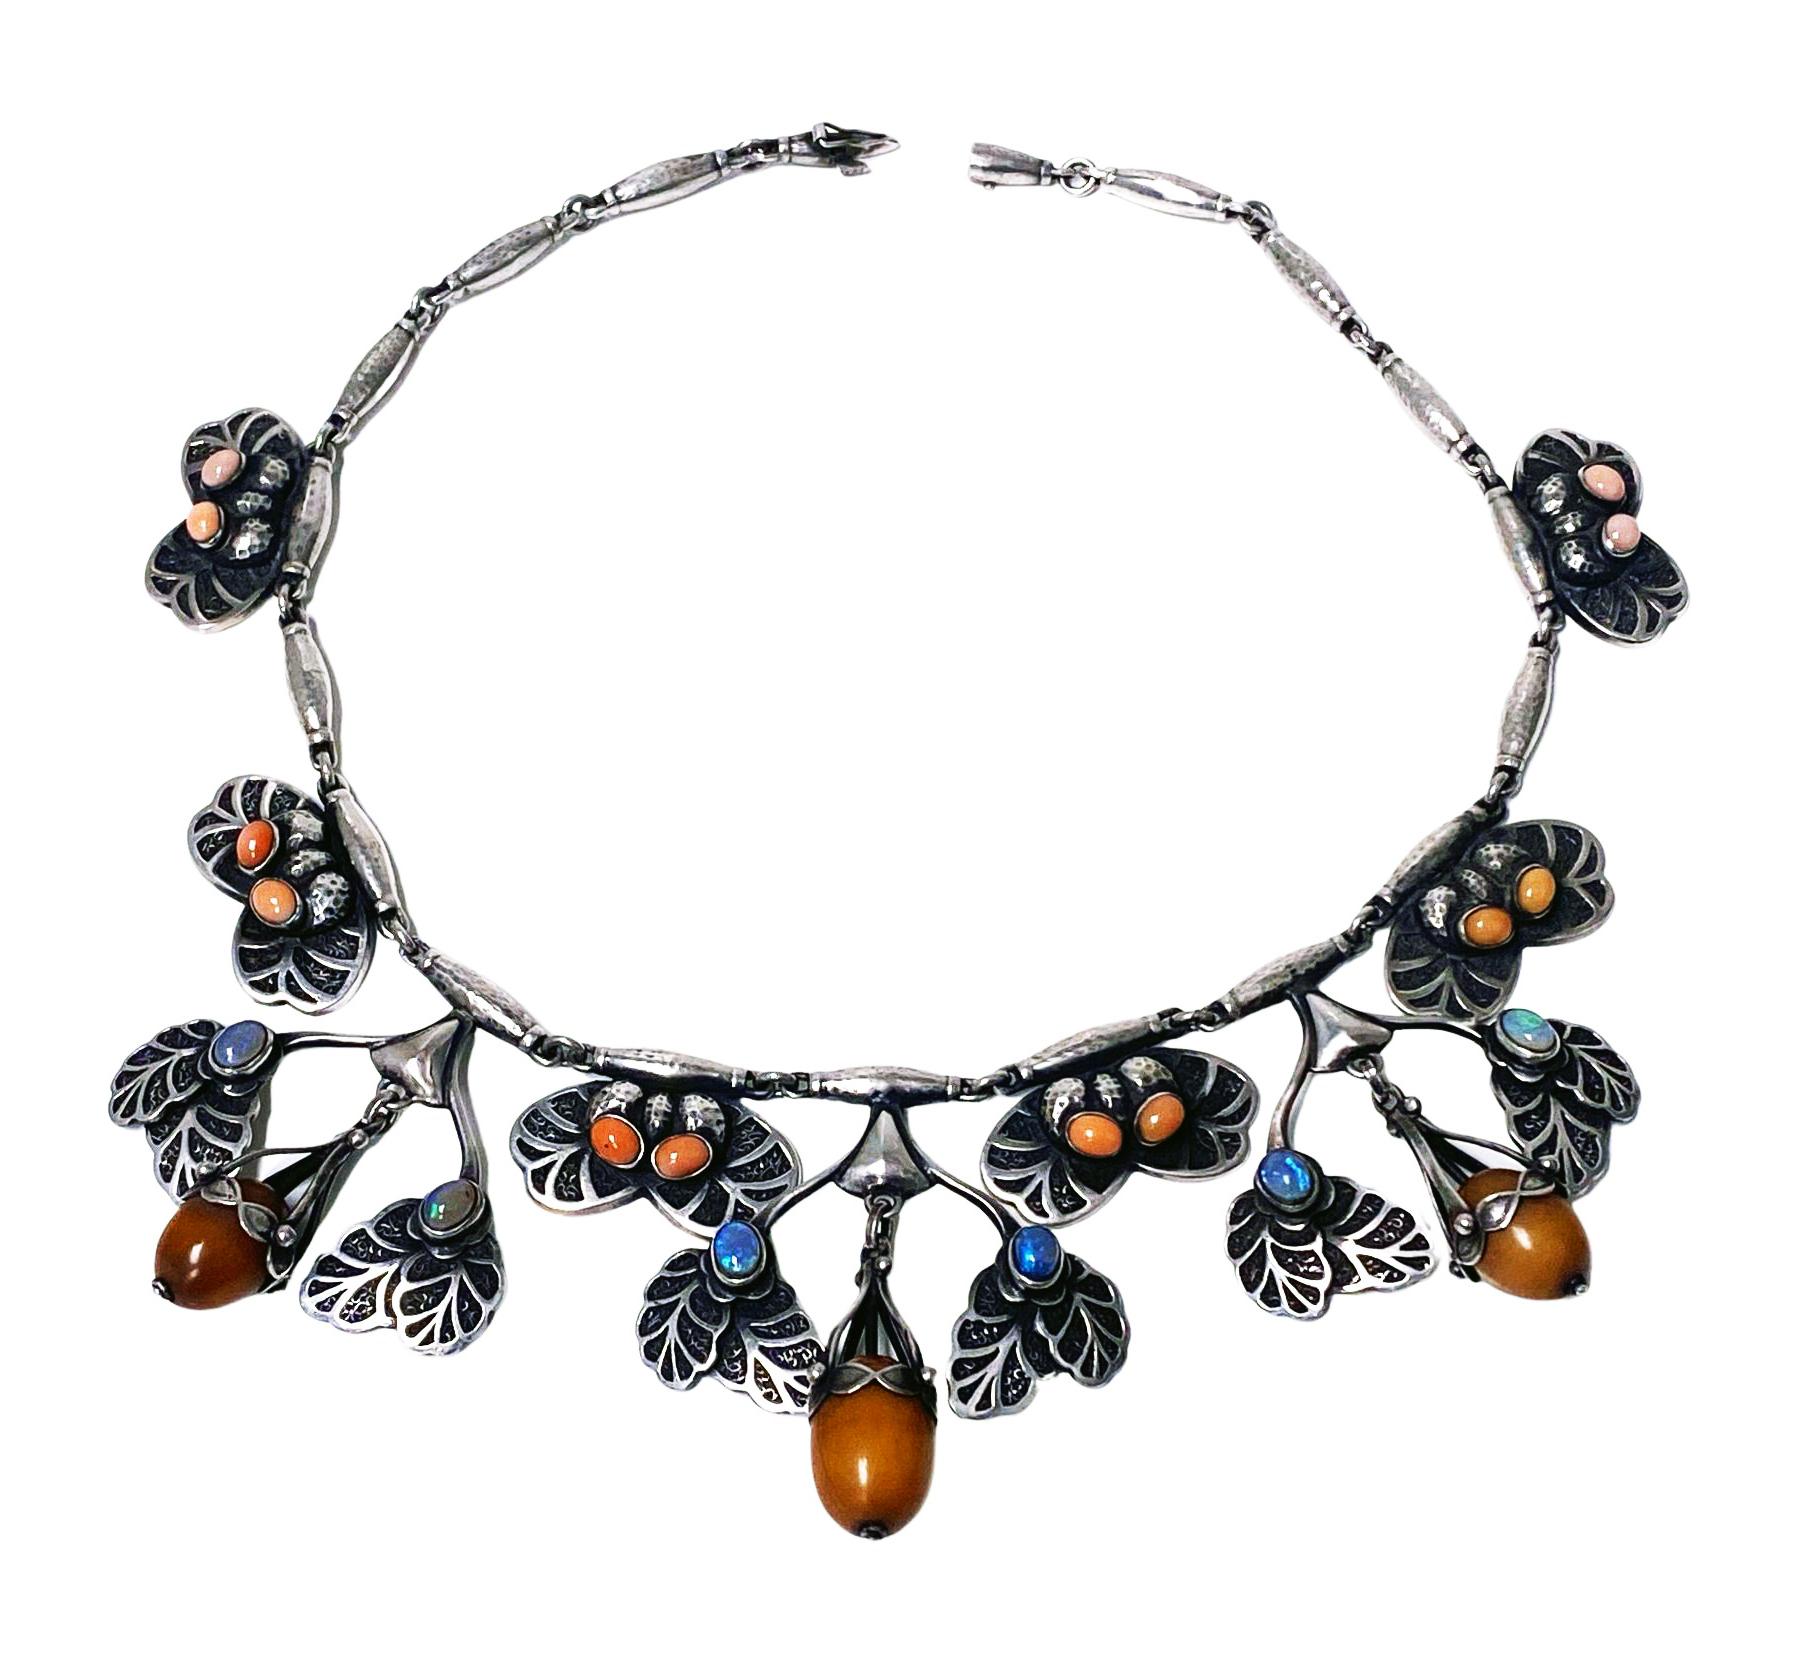 Georg Jensen exceptionally rare No 4 Necklace C.1915. The foliate links with oxidized stippled background against polished silver each bezel set with pairs of oval coral colour cabochons, interspaced with larger drops of opals, and set with amber